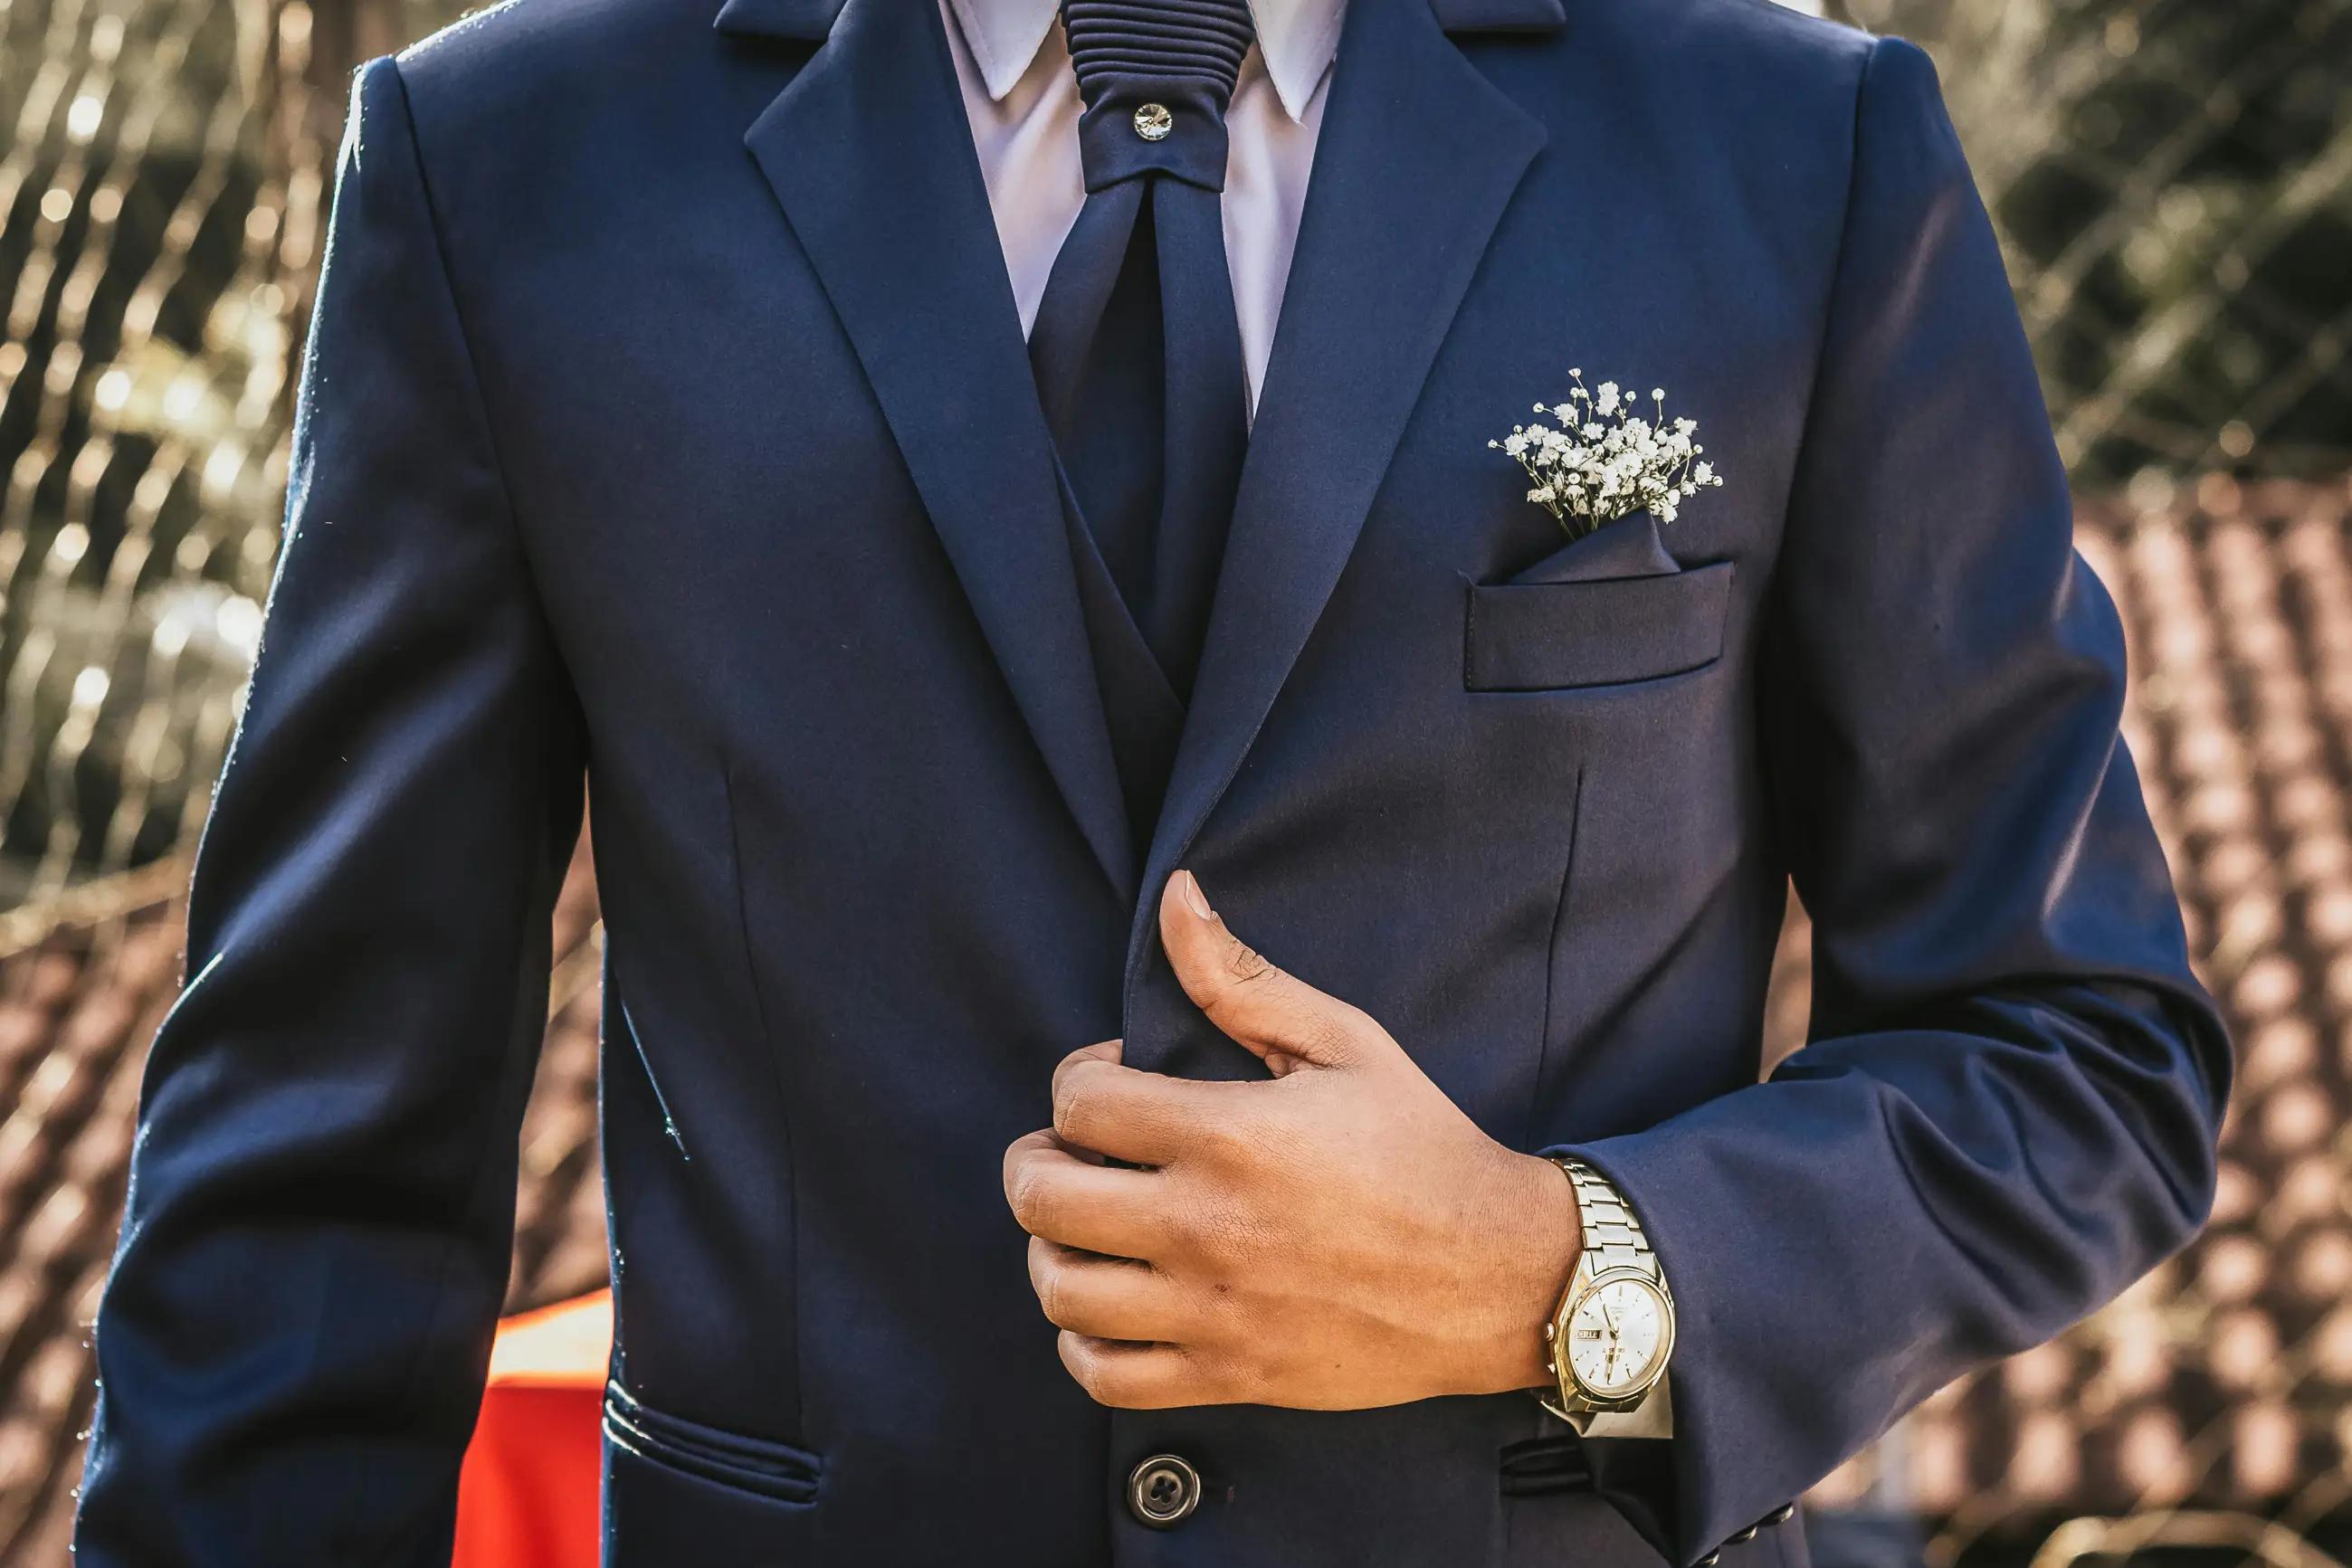 The Glamorous Grooms: A Guide to Stylish Men&#39;s Wedding Attire. Desktop Image